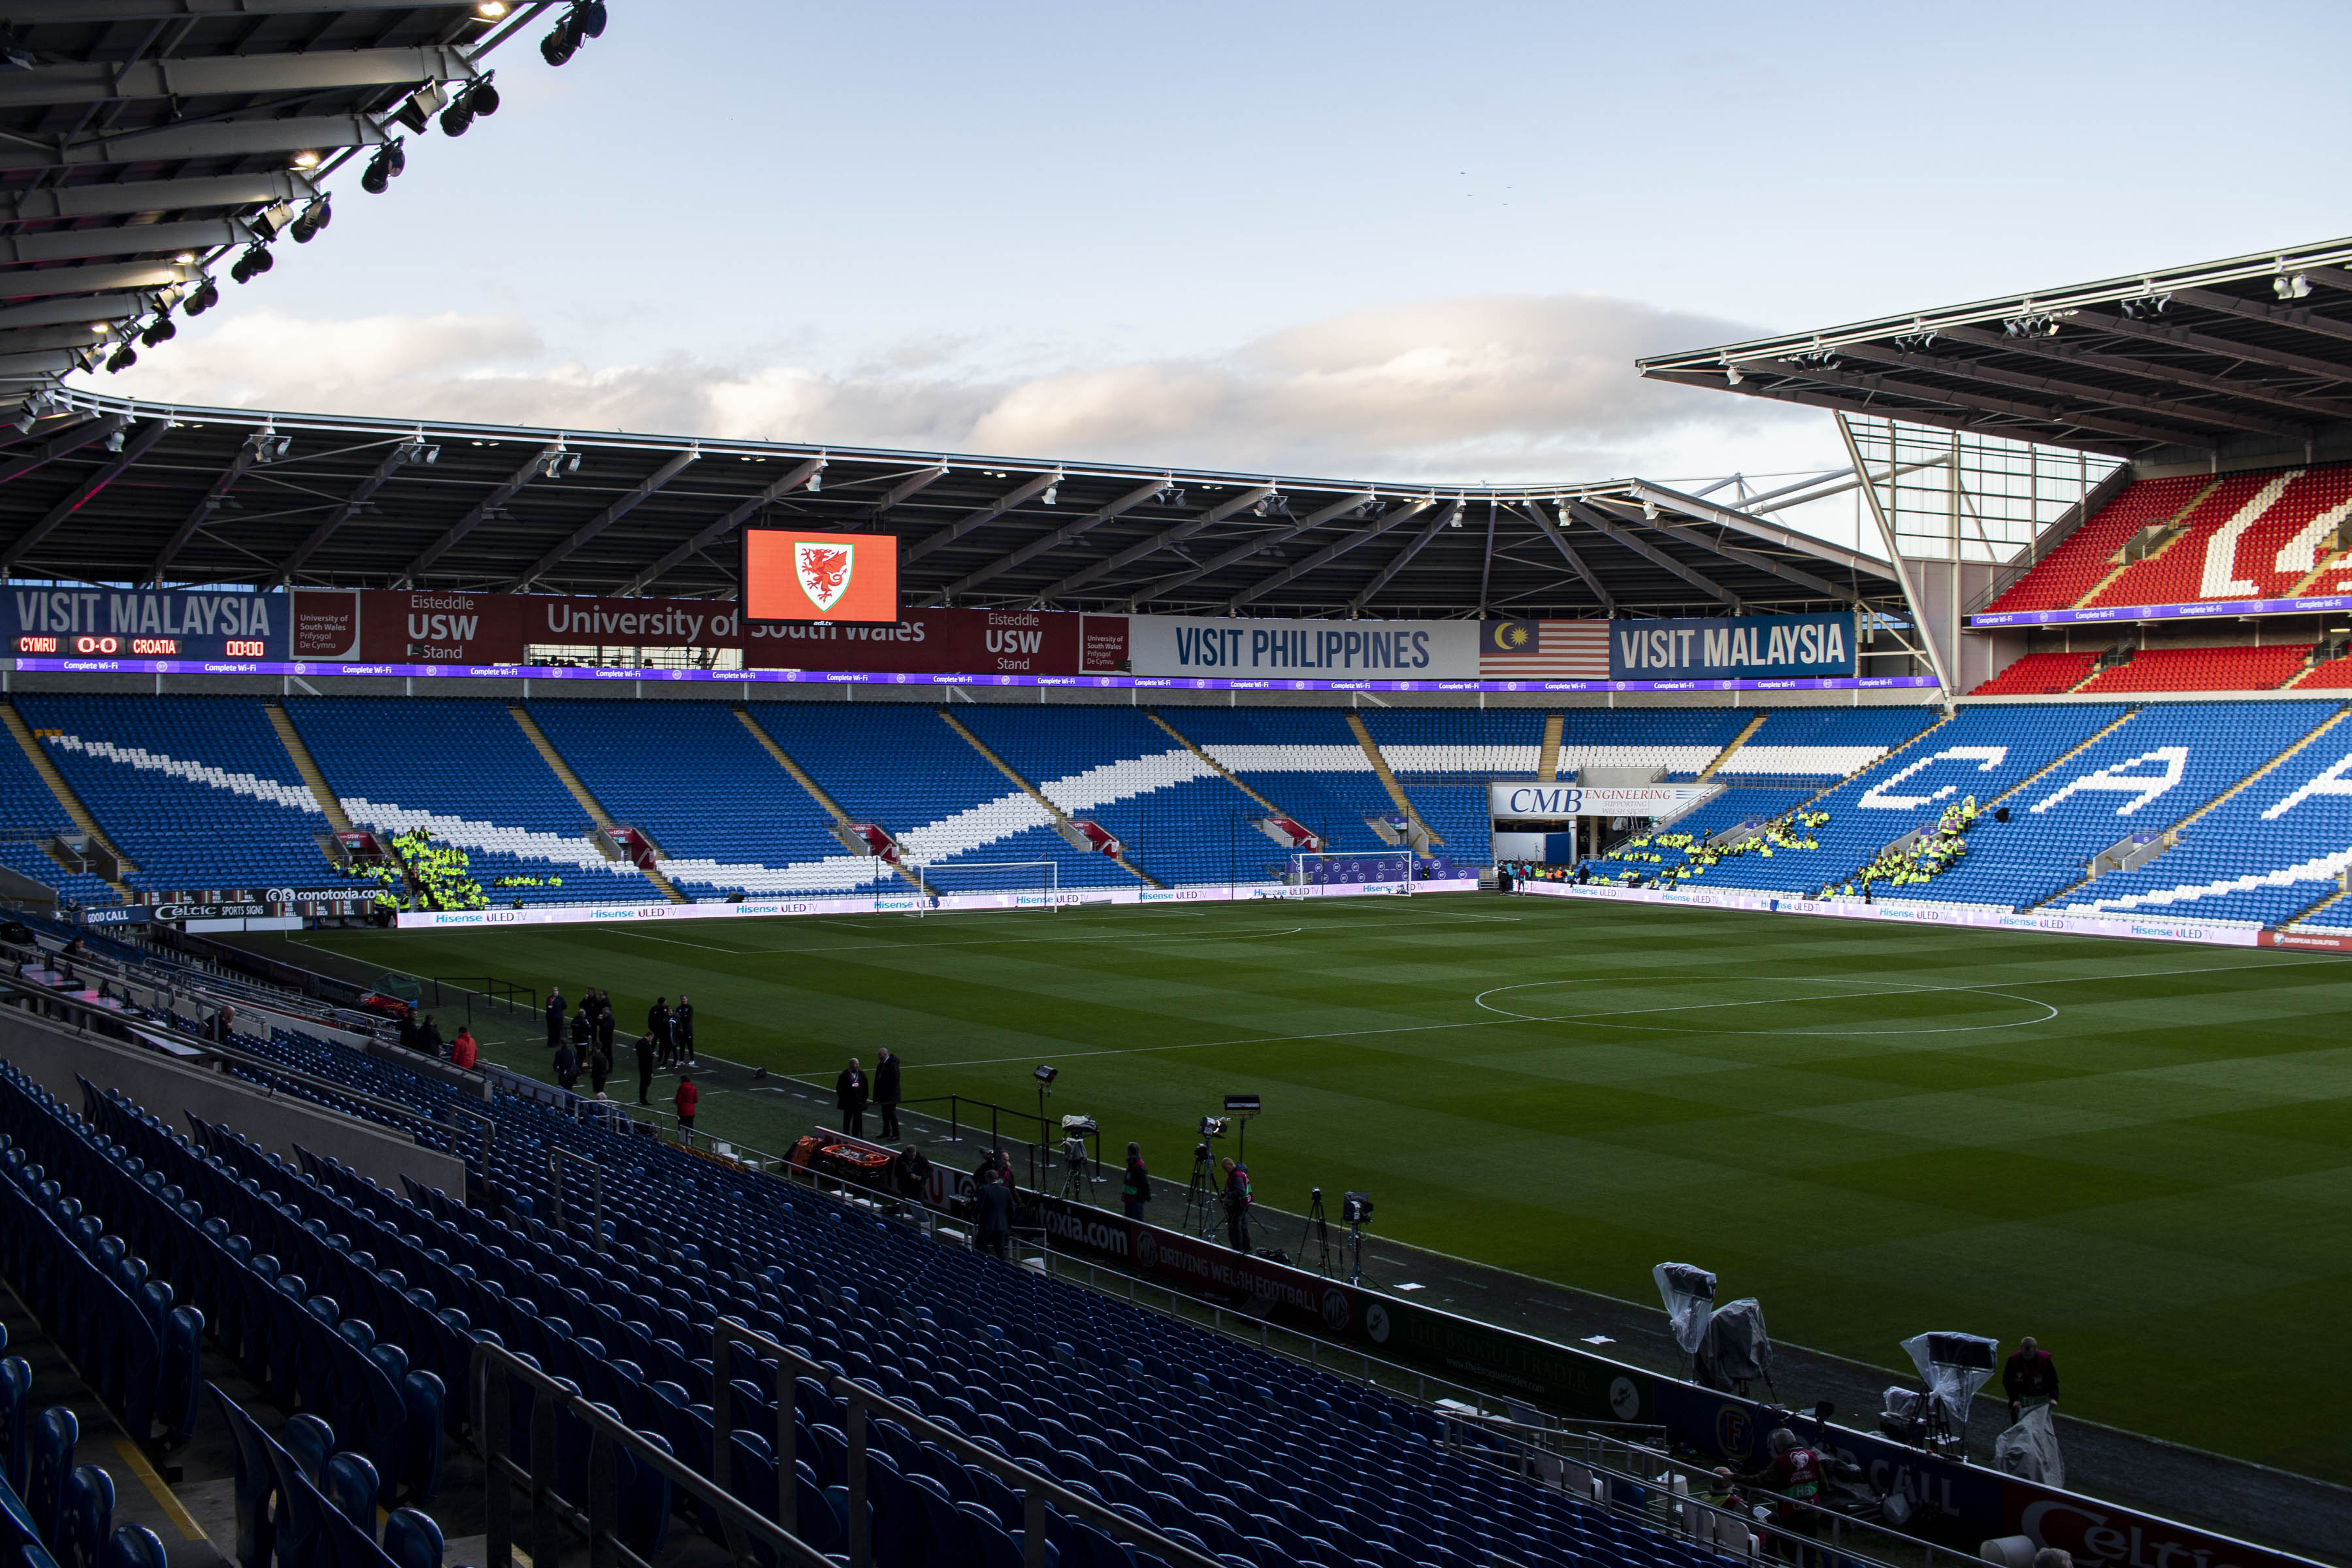 Cardiff City Stadium could play host to Nomads' Champions League